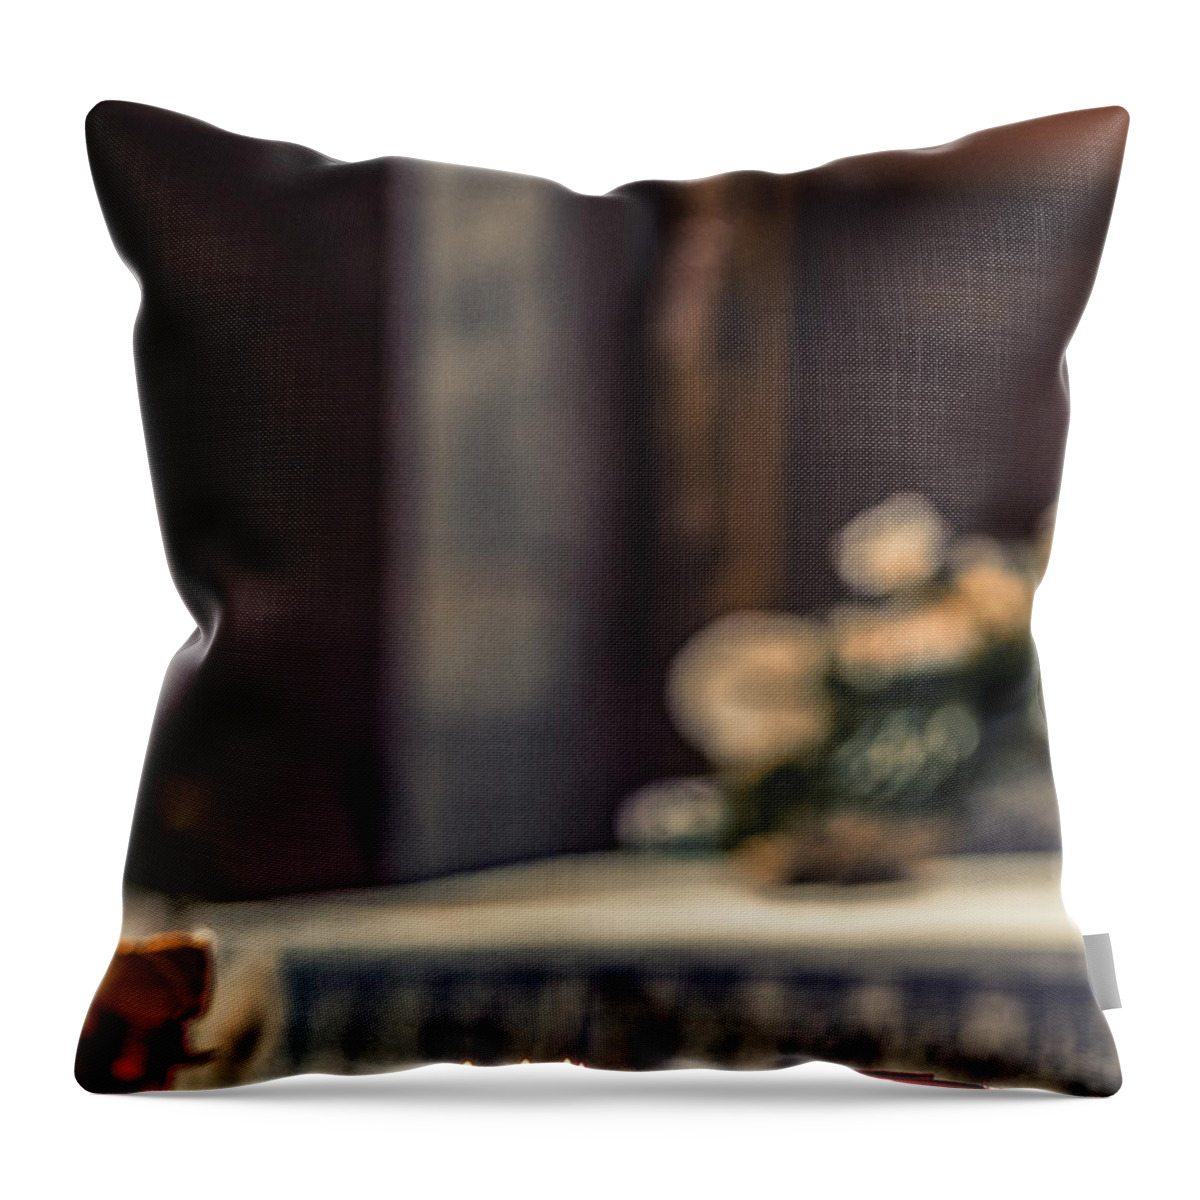 Christ Throw Pillow featuring the photograph Red votive tealights by Vivida Photo PC